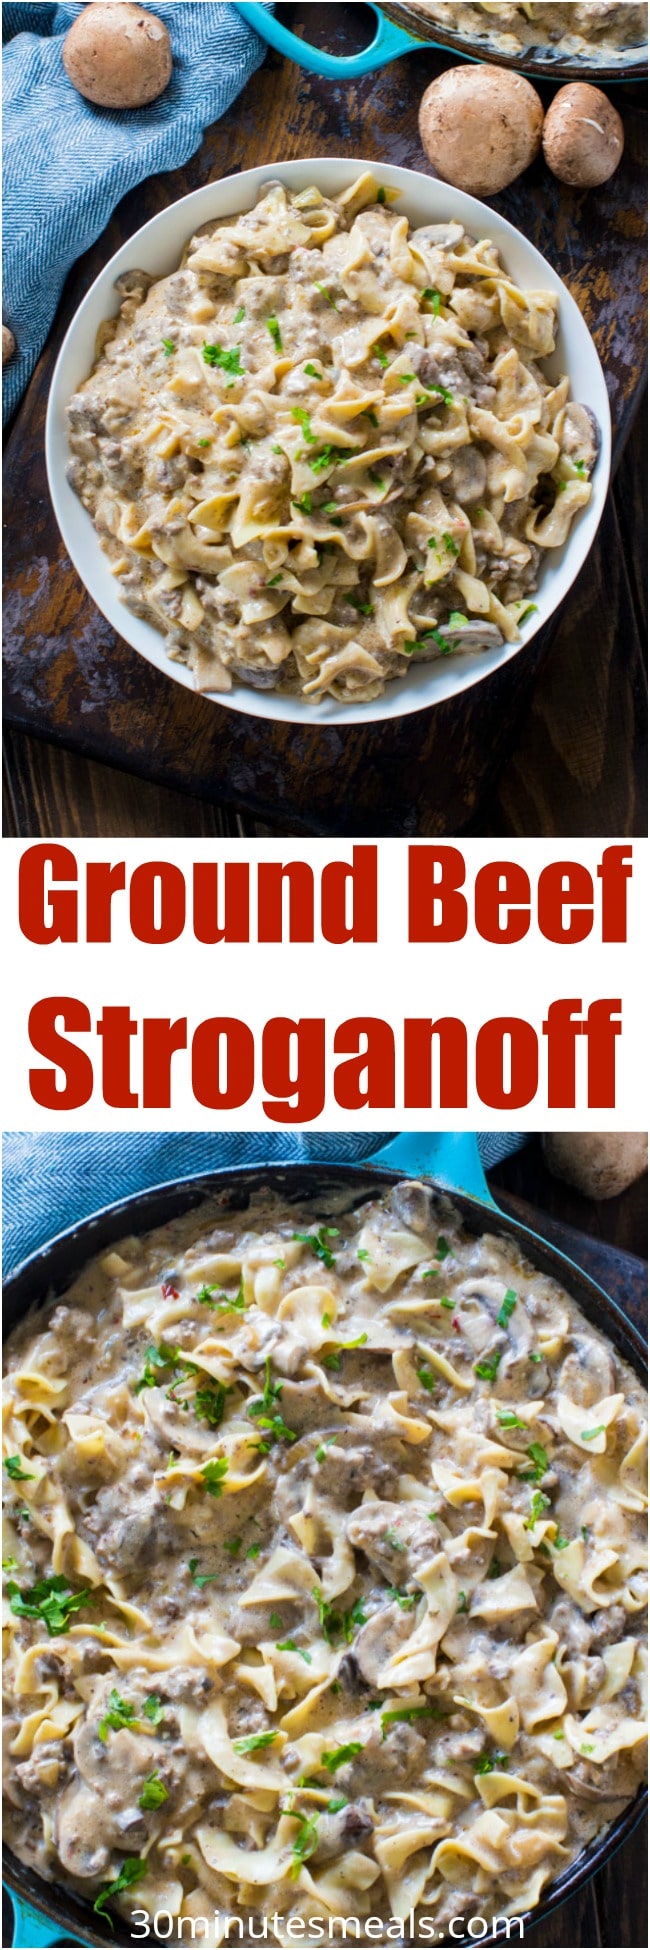 Ground Beef Stroganoff is so unbelievably creamy thanks to a few secret ingredients. Easy to make, in just 30 minutes you have an amazing dinner!